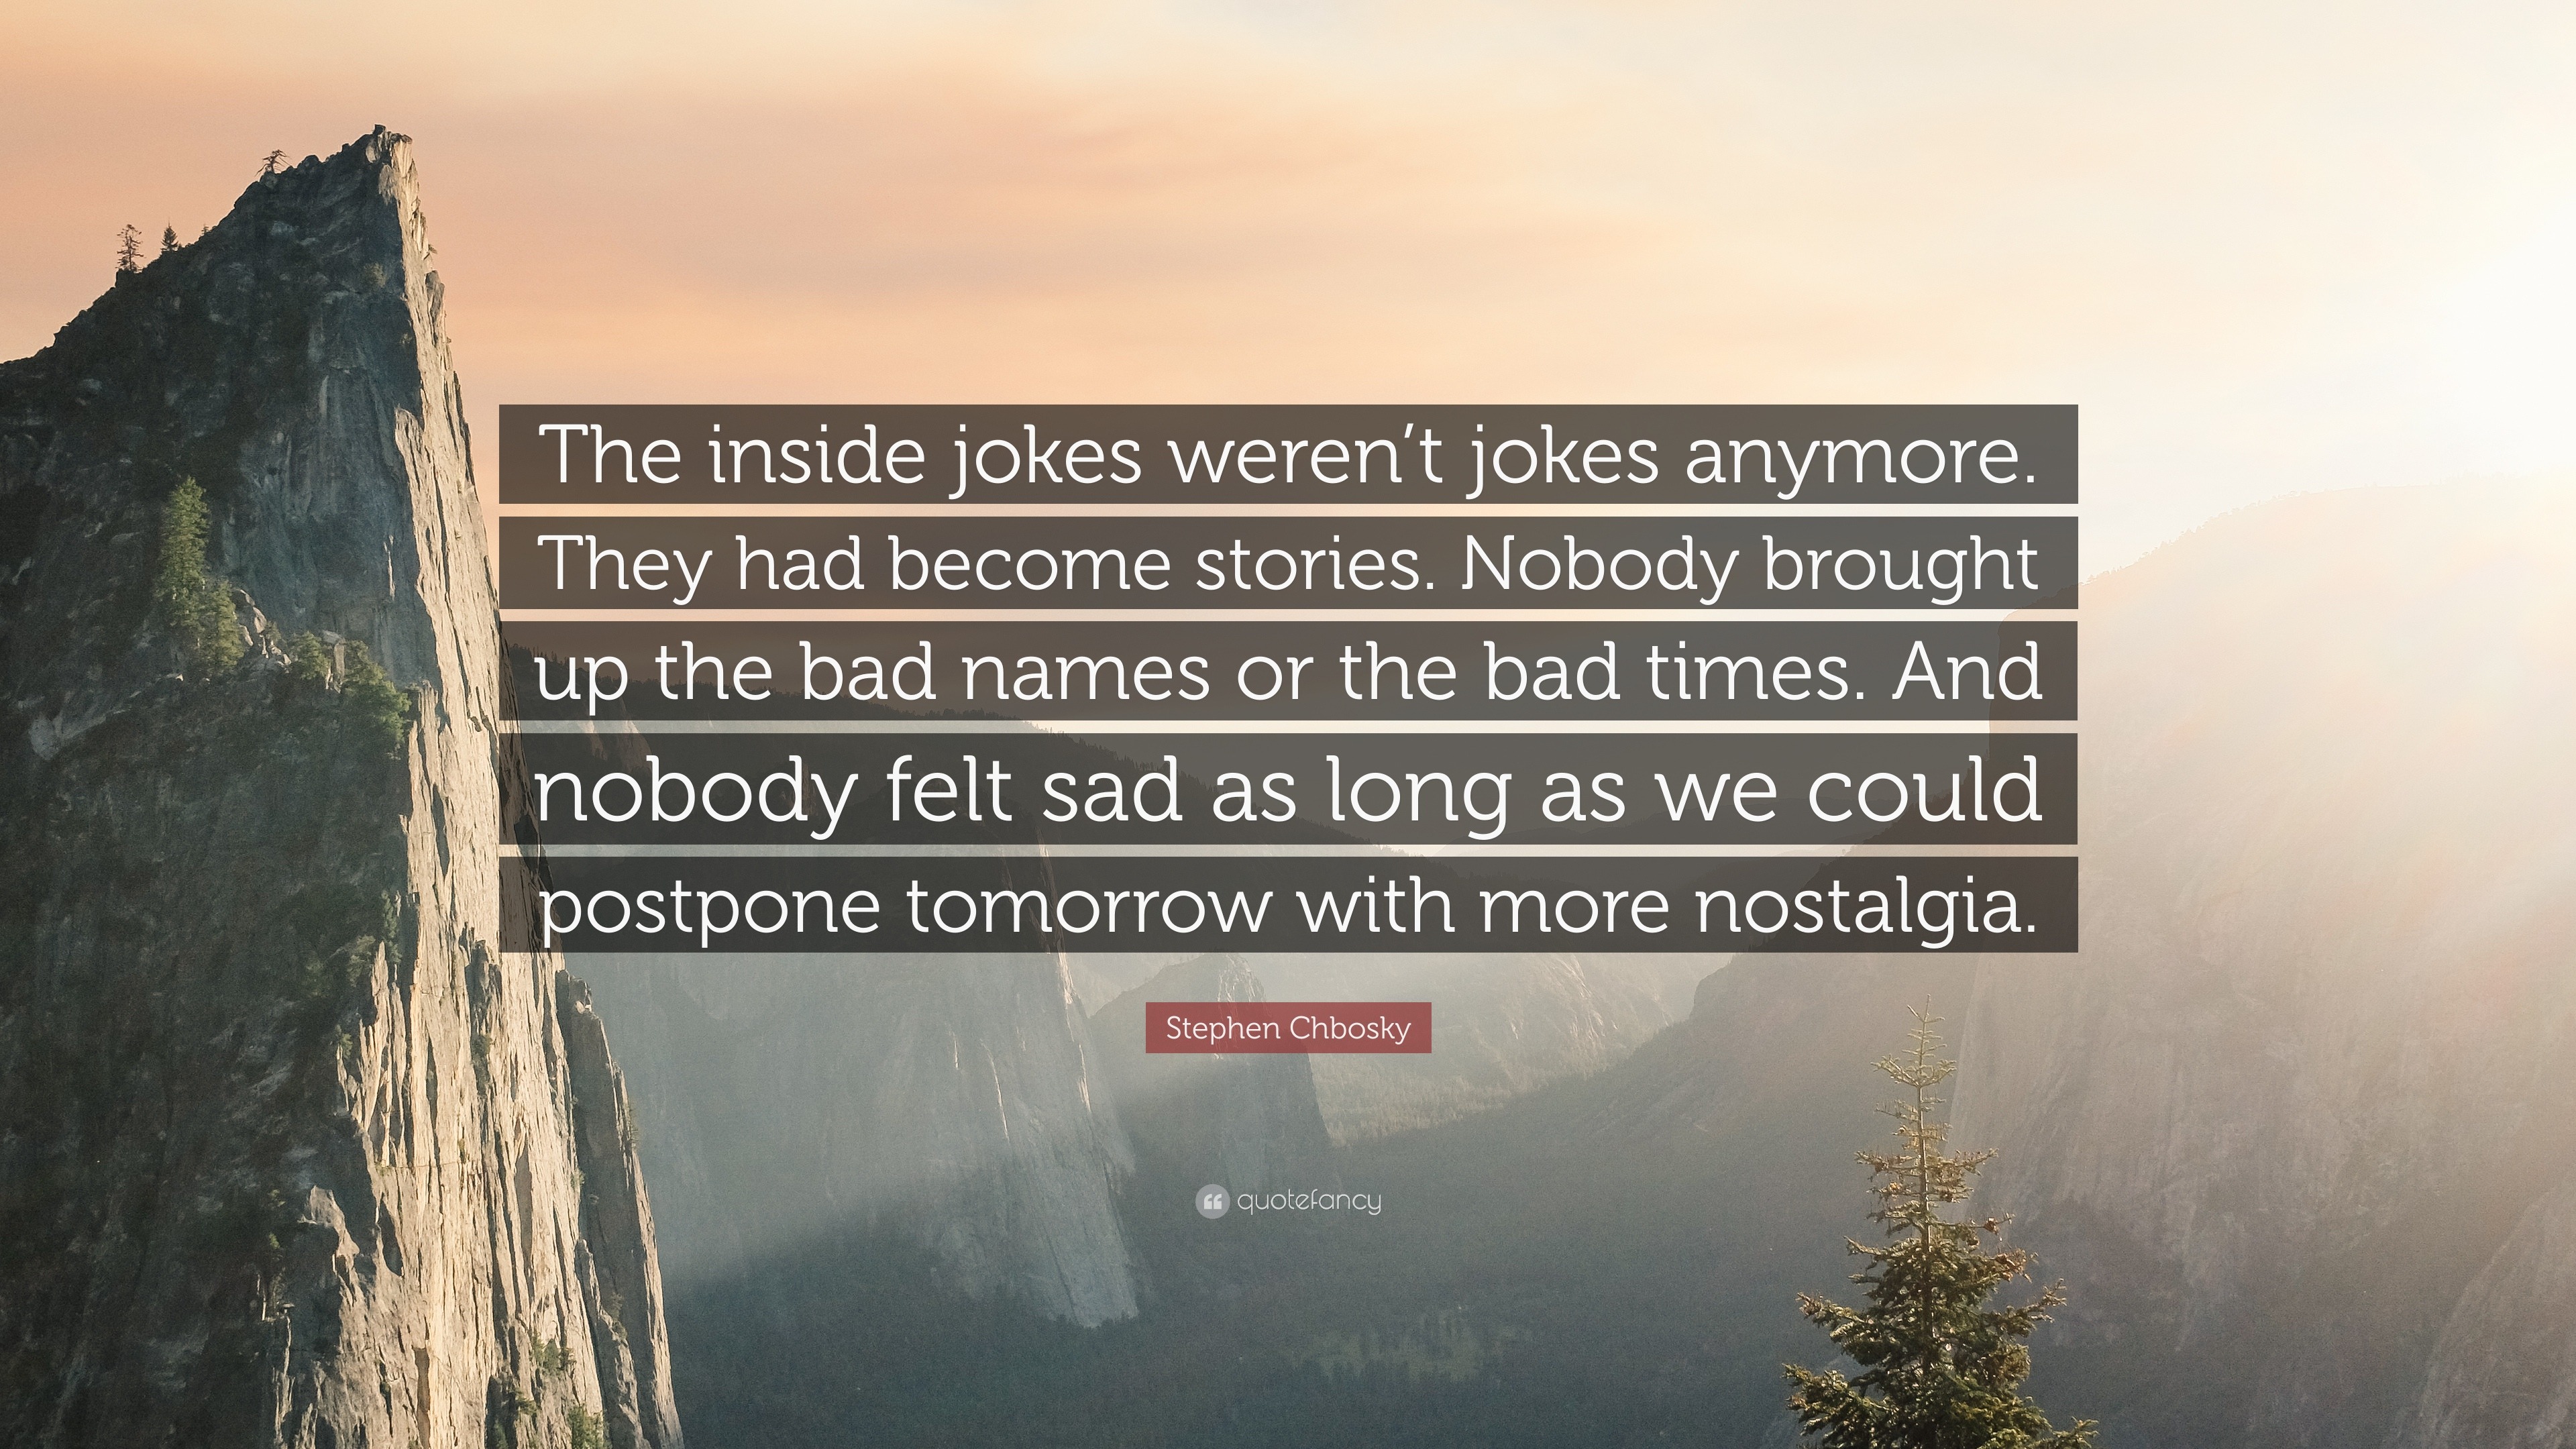 Stephen Chbosky quote: There were other stories and other names